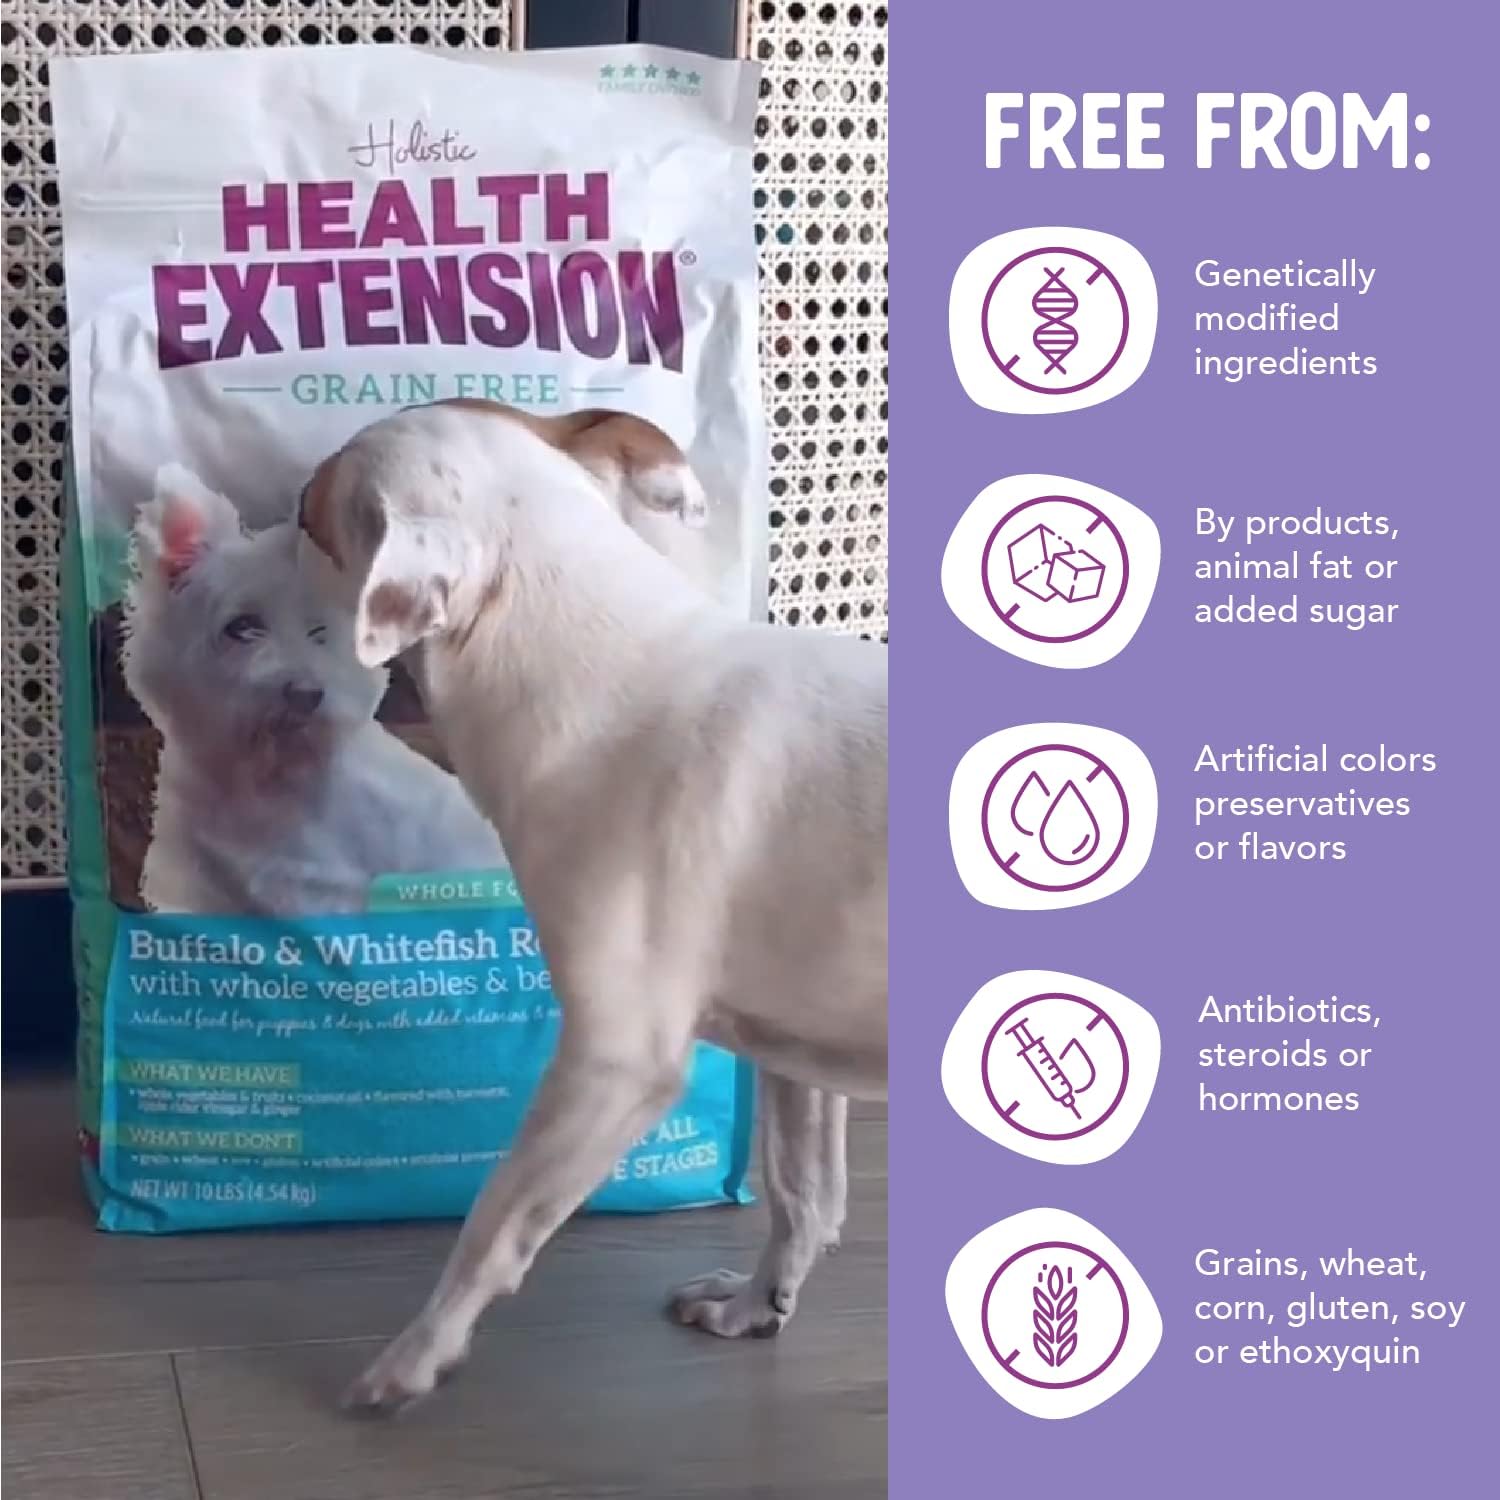 Health Extension Little Bites Dry Dog Food, Natural Food, Suitable for All Puppies, Grain Free Buffalo, Whitefish & Sweet Potato Recipe with Whole Vegetable & Berries (23.5 Pound / 10.6 kg) : Pet Supplies